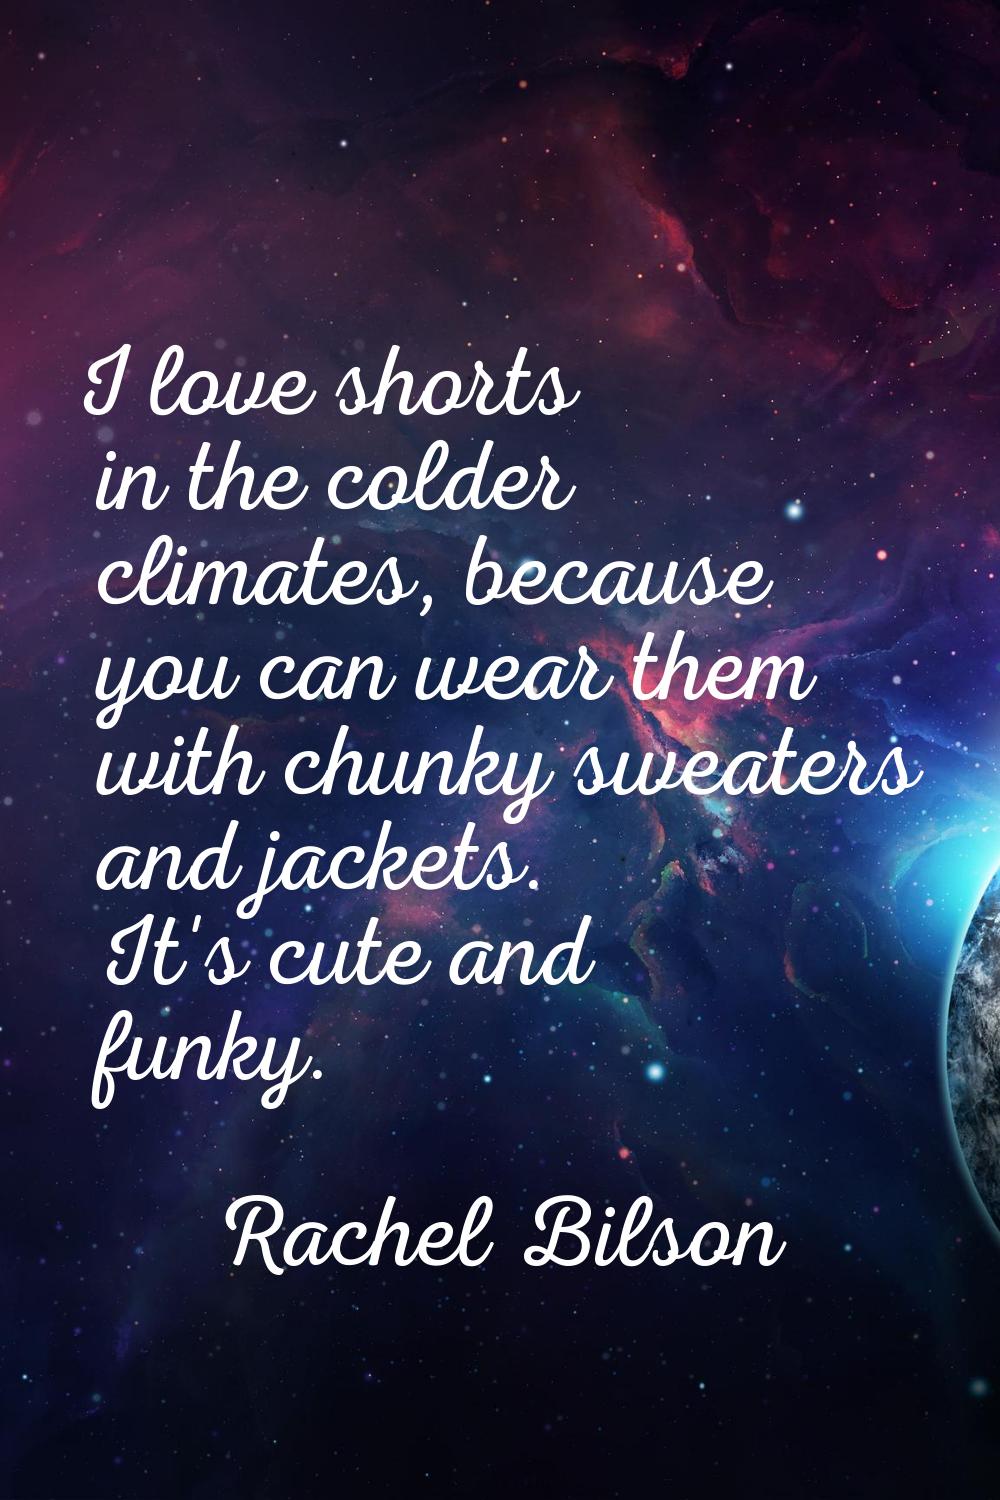 I love shorts in the colder climates, because you can wear them with chunky sweaters and jackets. I